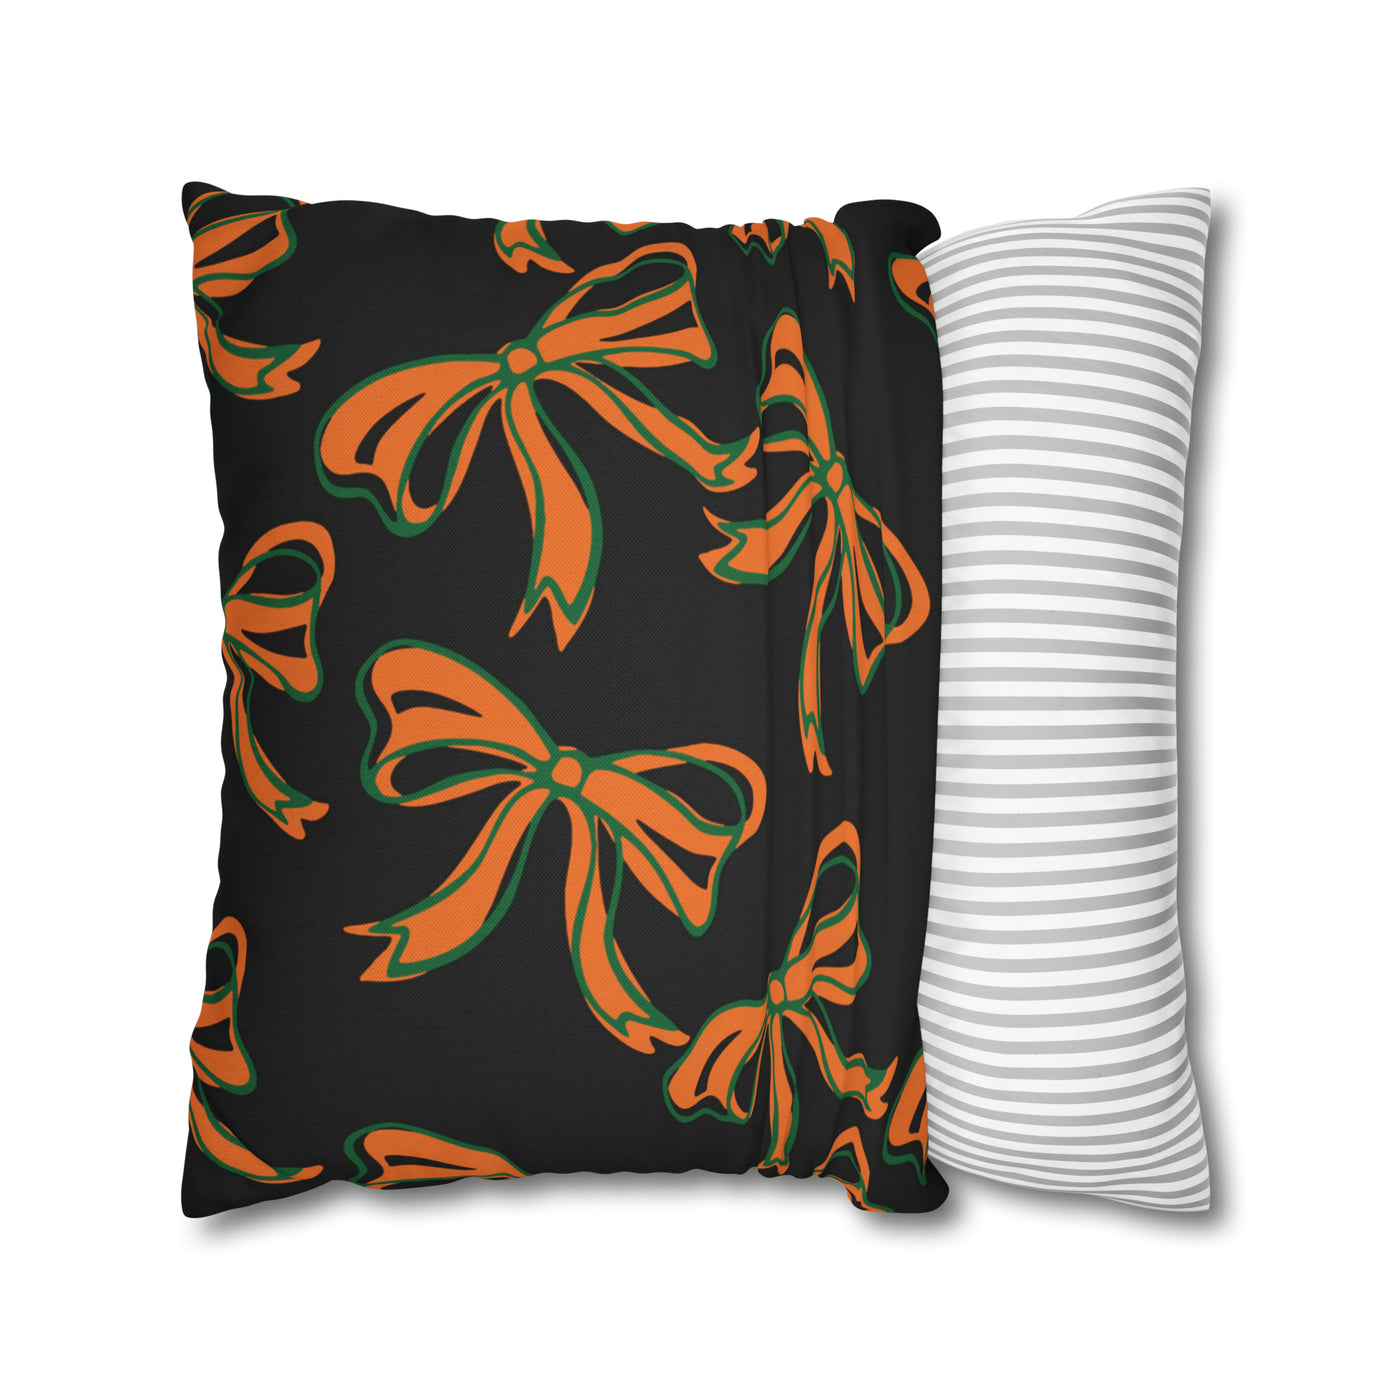 Trendy Bow College Pillow Cover - Dorm Pillow, Graduation Gift,Bed Party Gift,Acceptance Gift,College Gift, Miami Hurricanes, orange & green